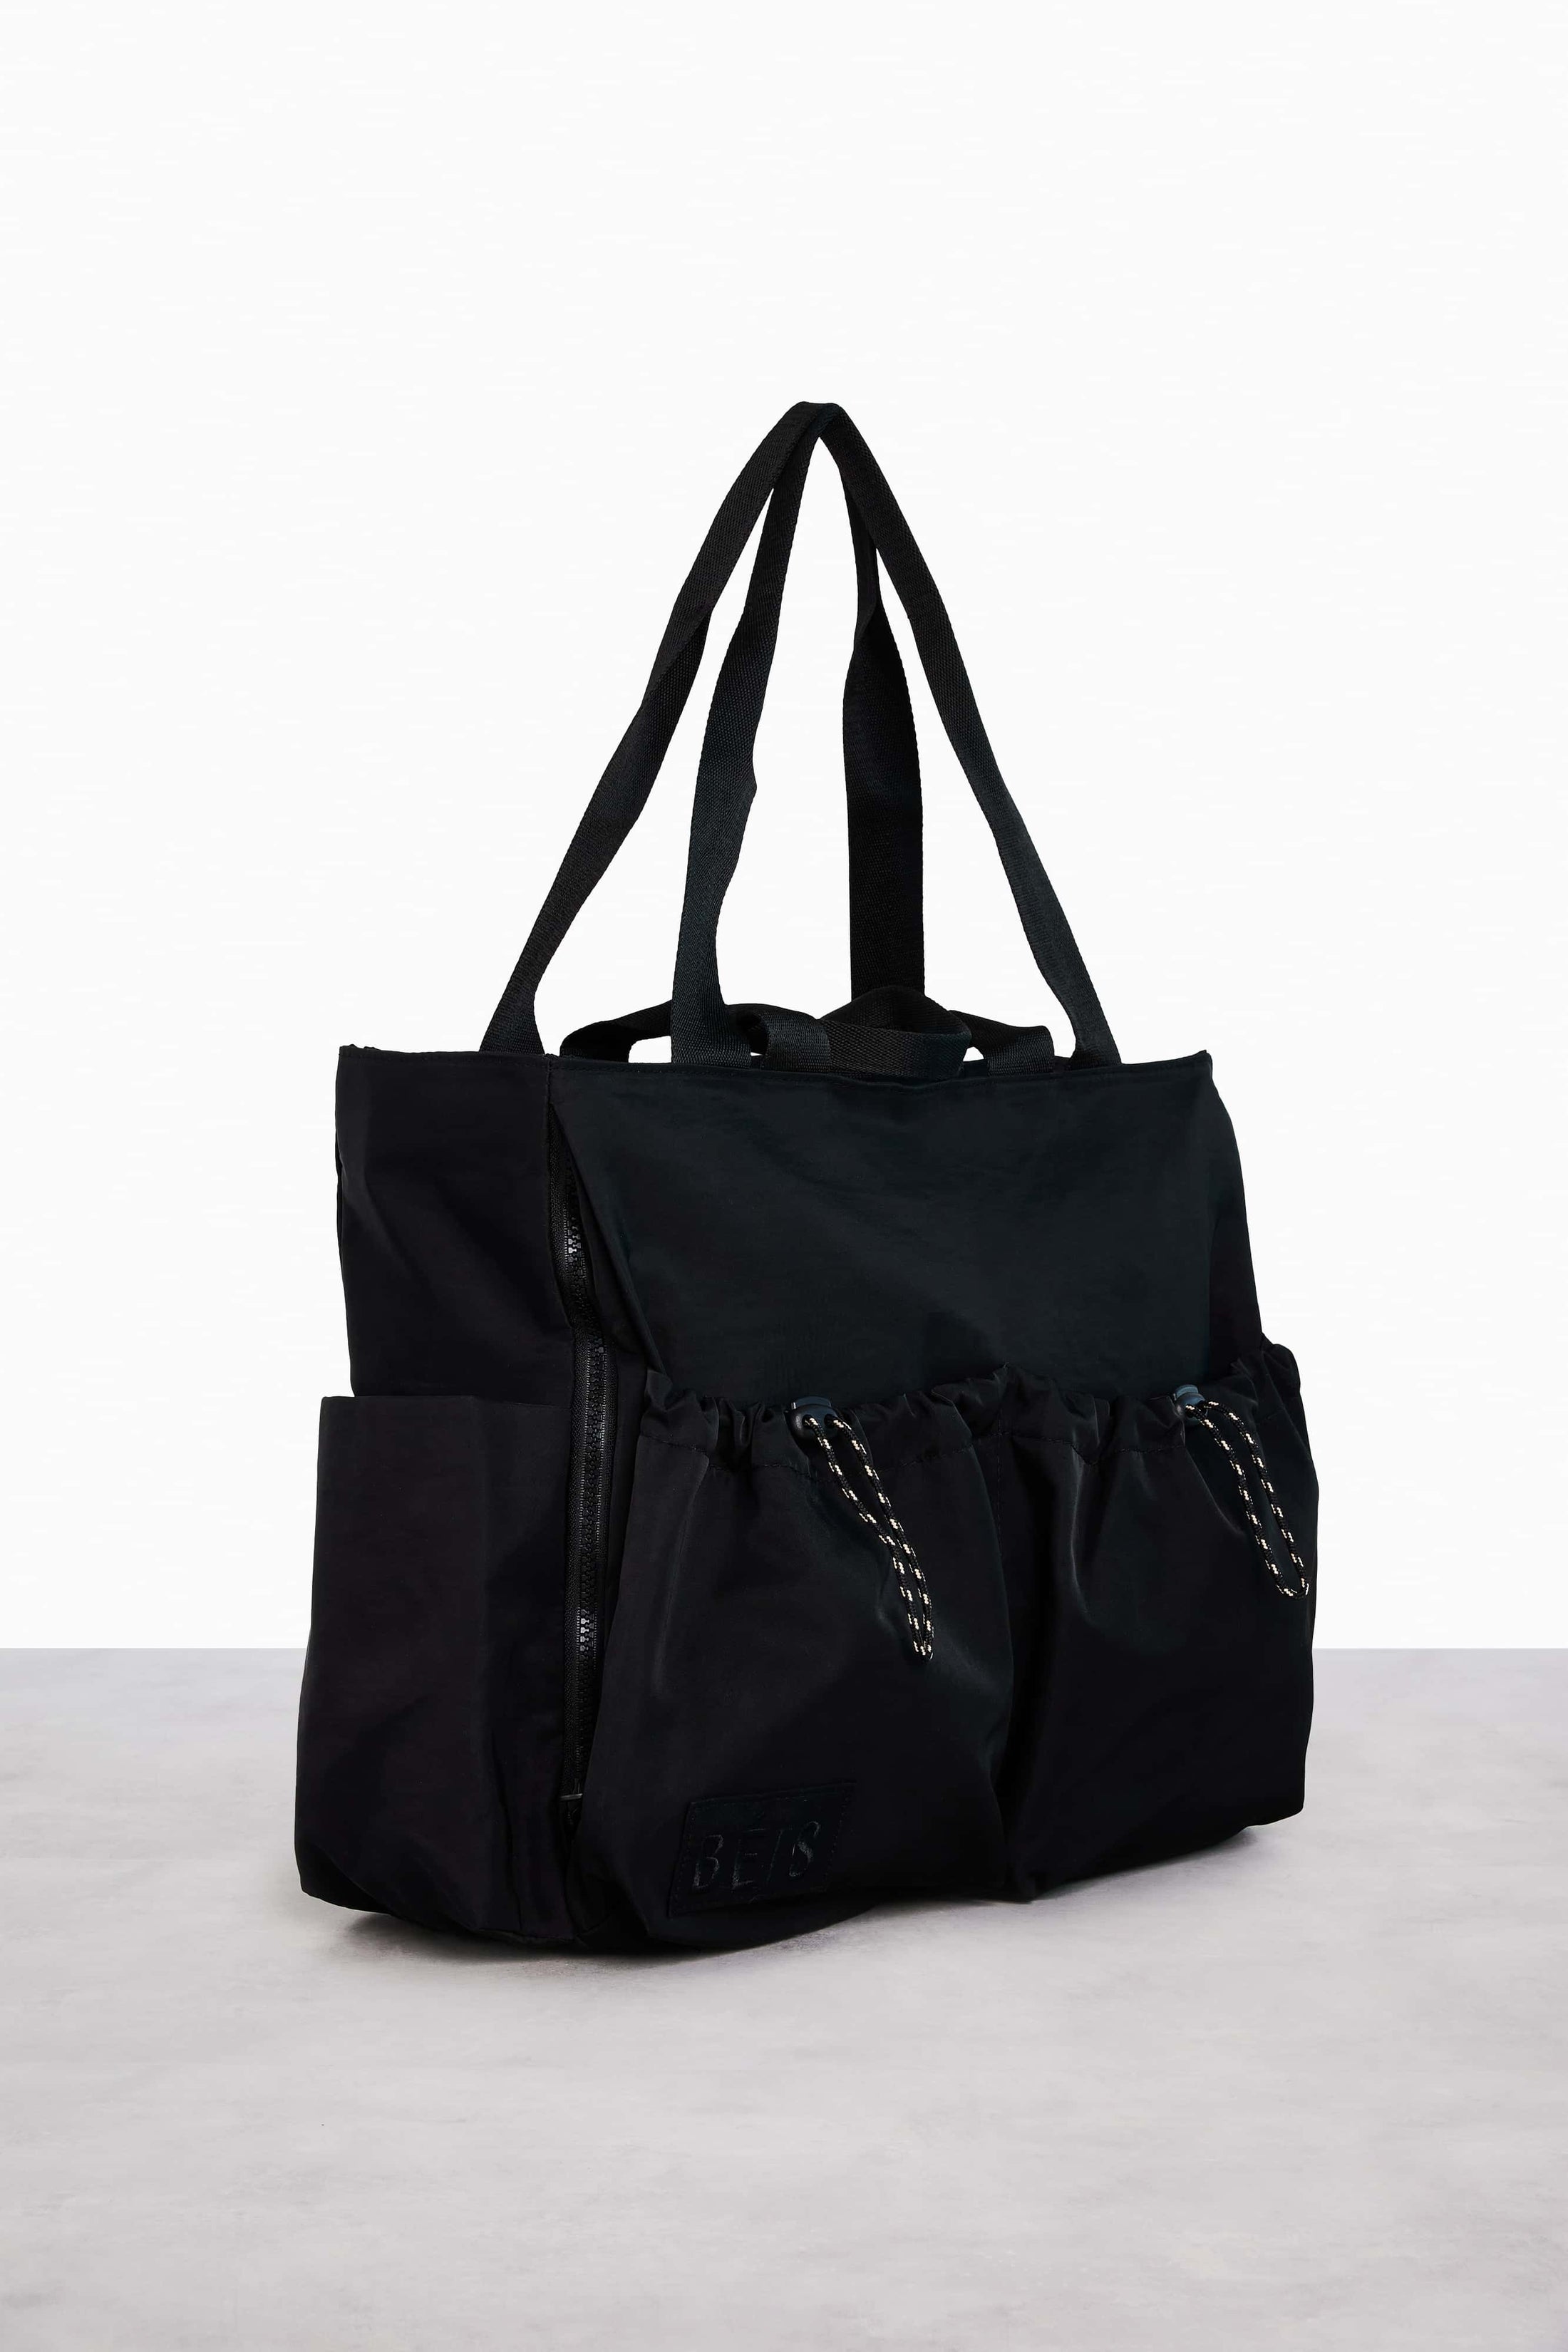 BÉIS 'The Sport Carryall' in Black - Chic Tennis Tote